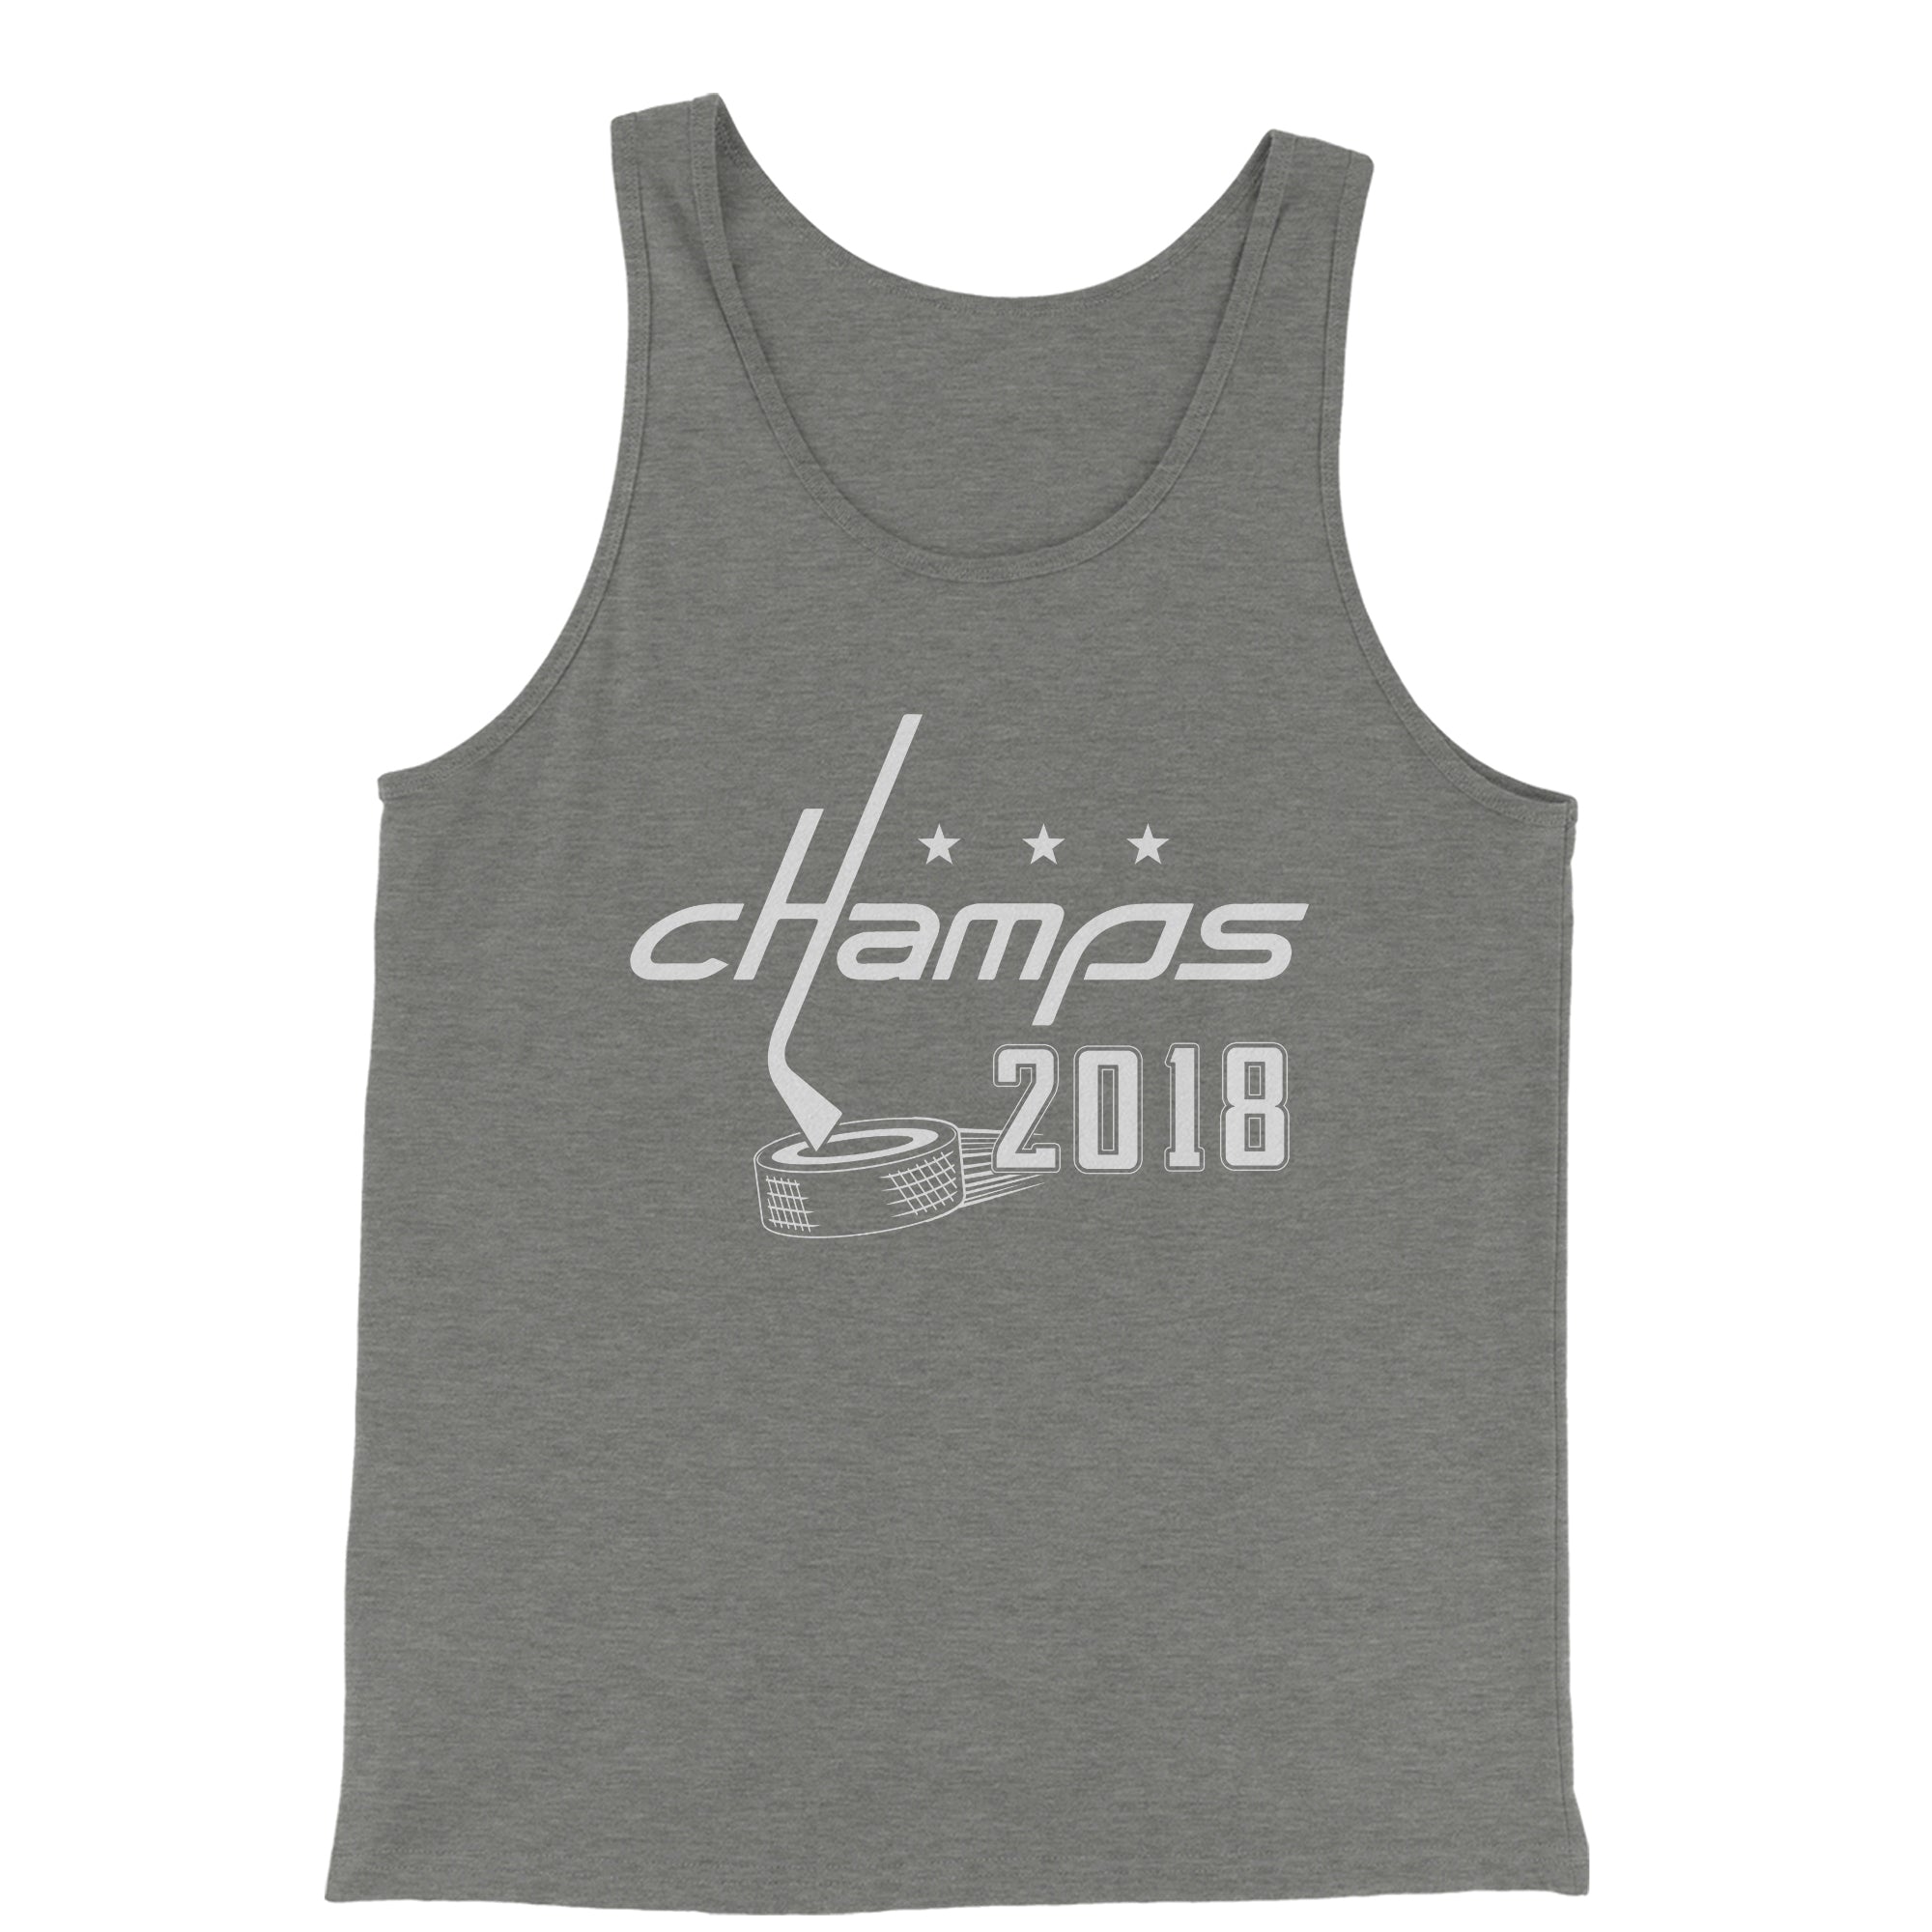 Allcaps Hockey 2018 Champs All Caps #Allcaps Cup Men's Jersey Tank